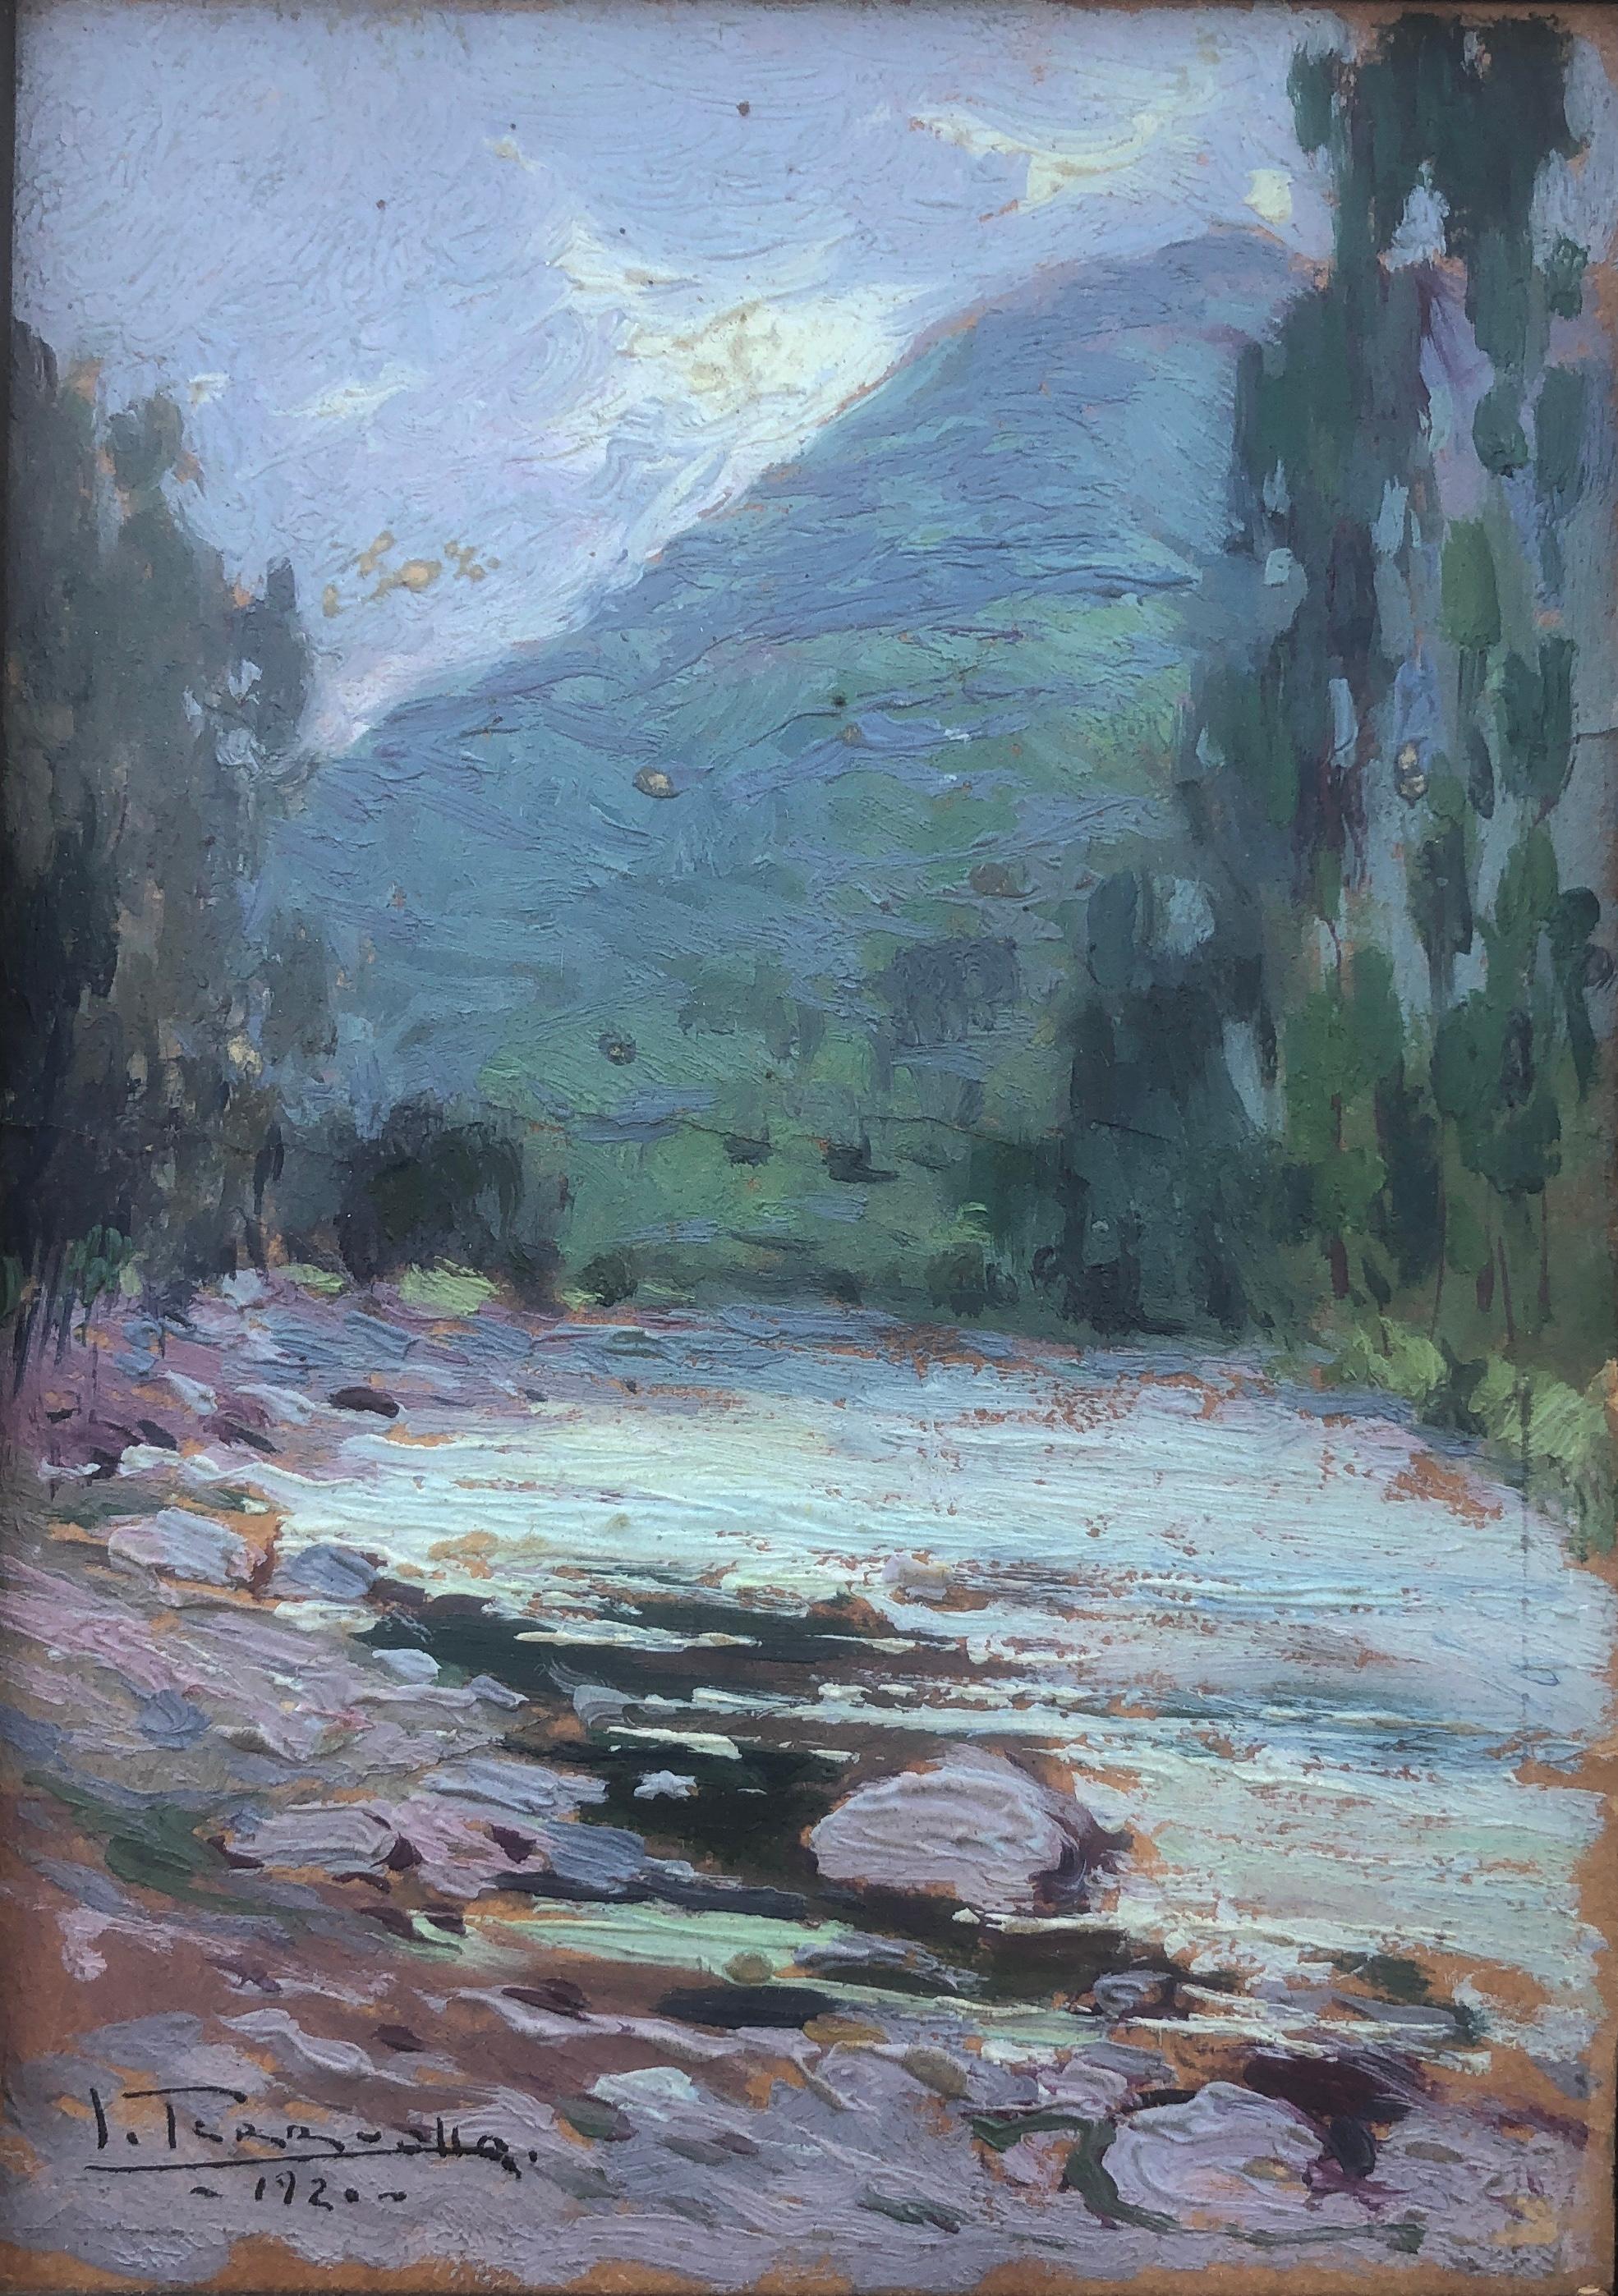 Joaquin Terruella Matilla Landscape Painting - Landscape with river oil on cardboard painting impressionism Spain